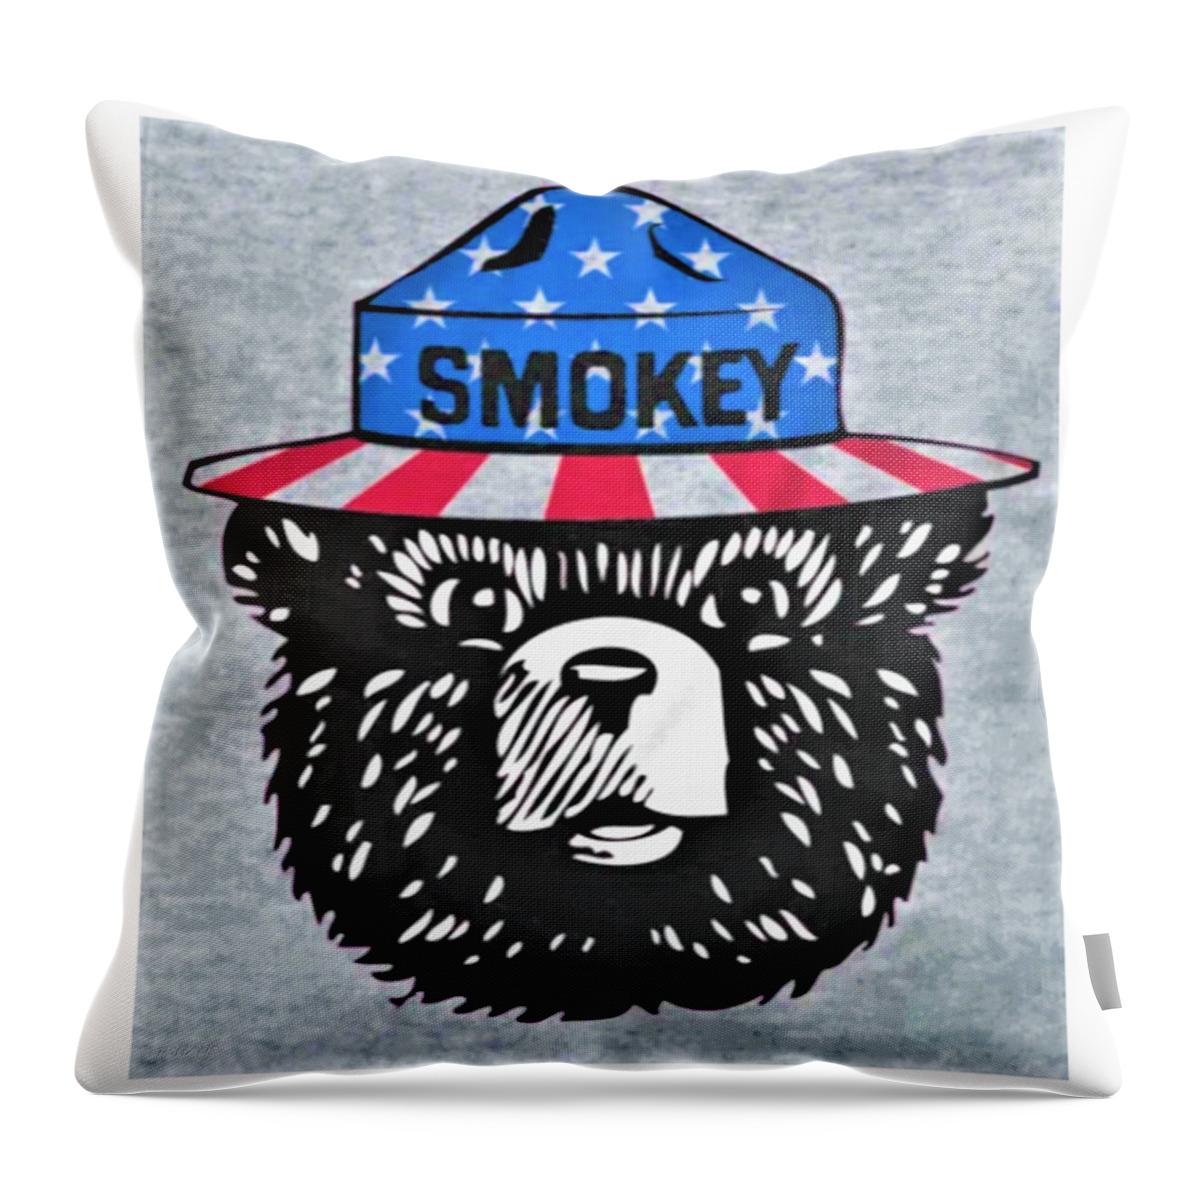 Smokey The Bear Throw Pillow featuring the photograph Smokey The Bear by Rob Hans